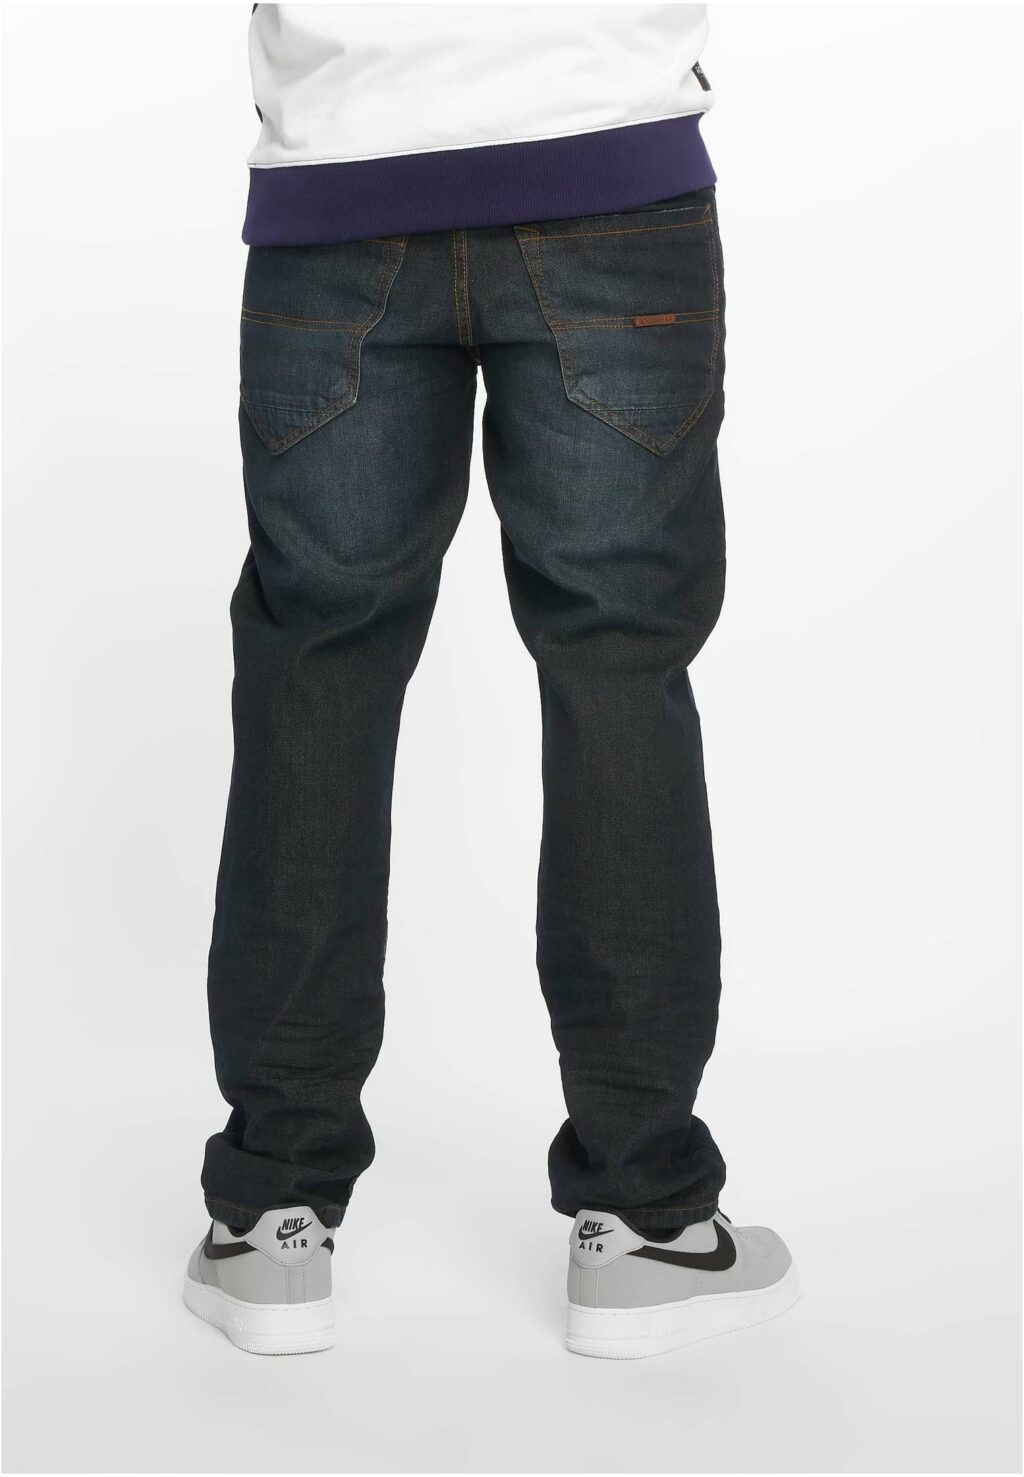 Rocawear TUE Relax Fit Jeans blue washed W44 RWJS016